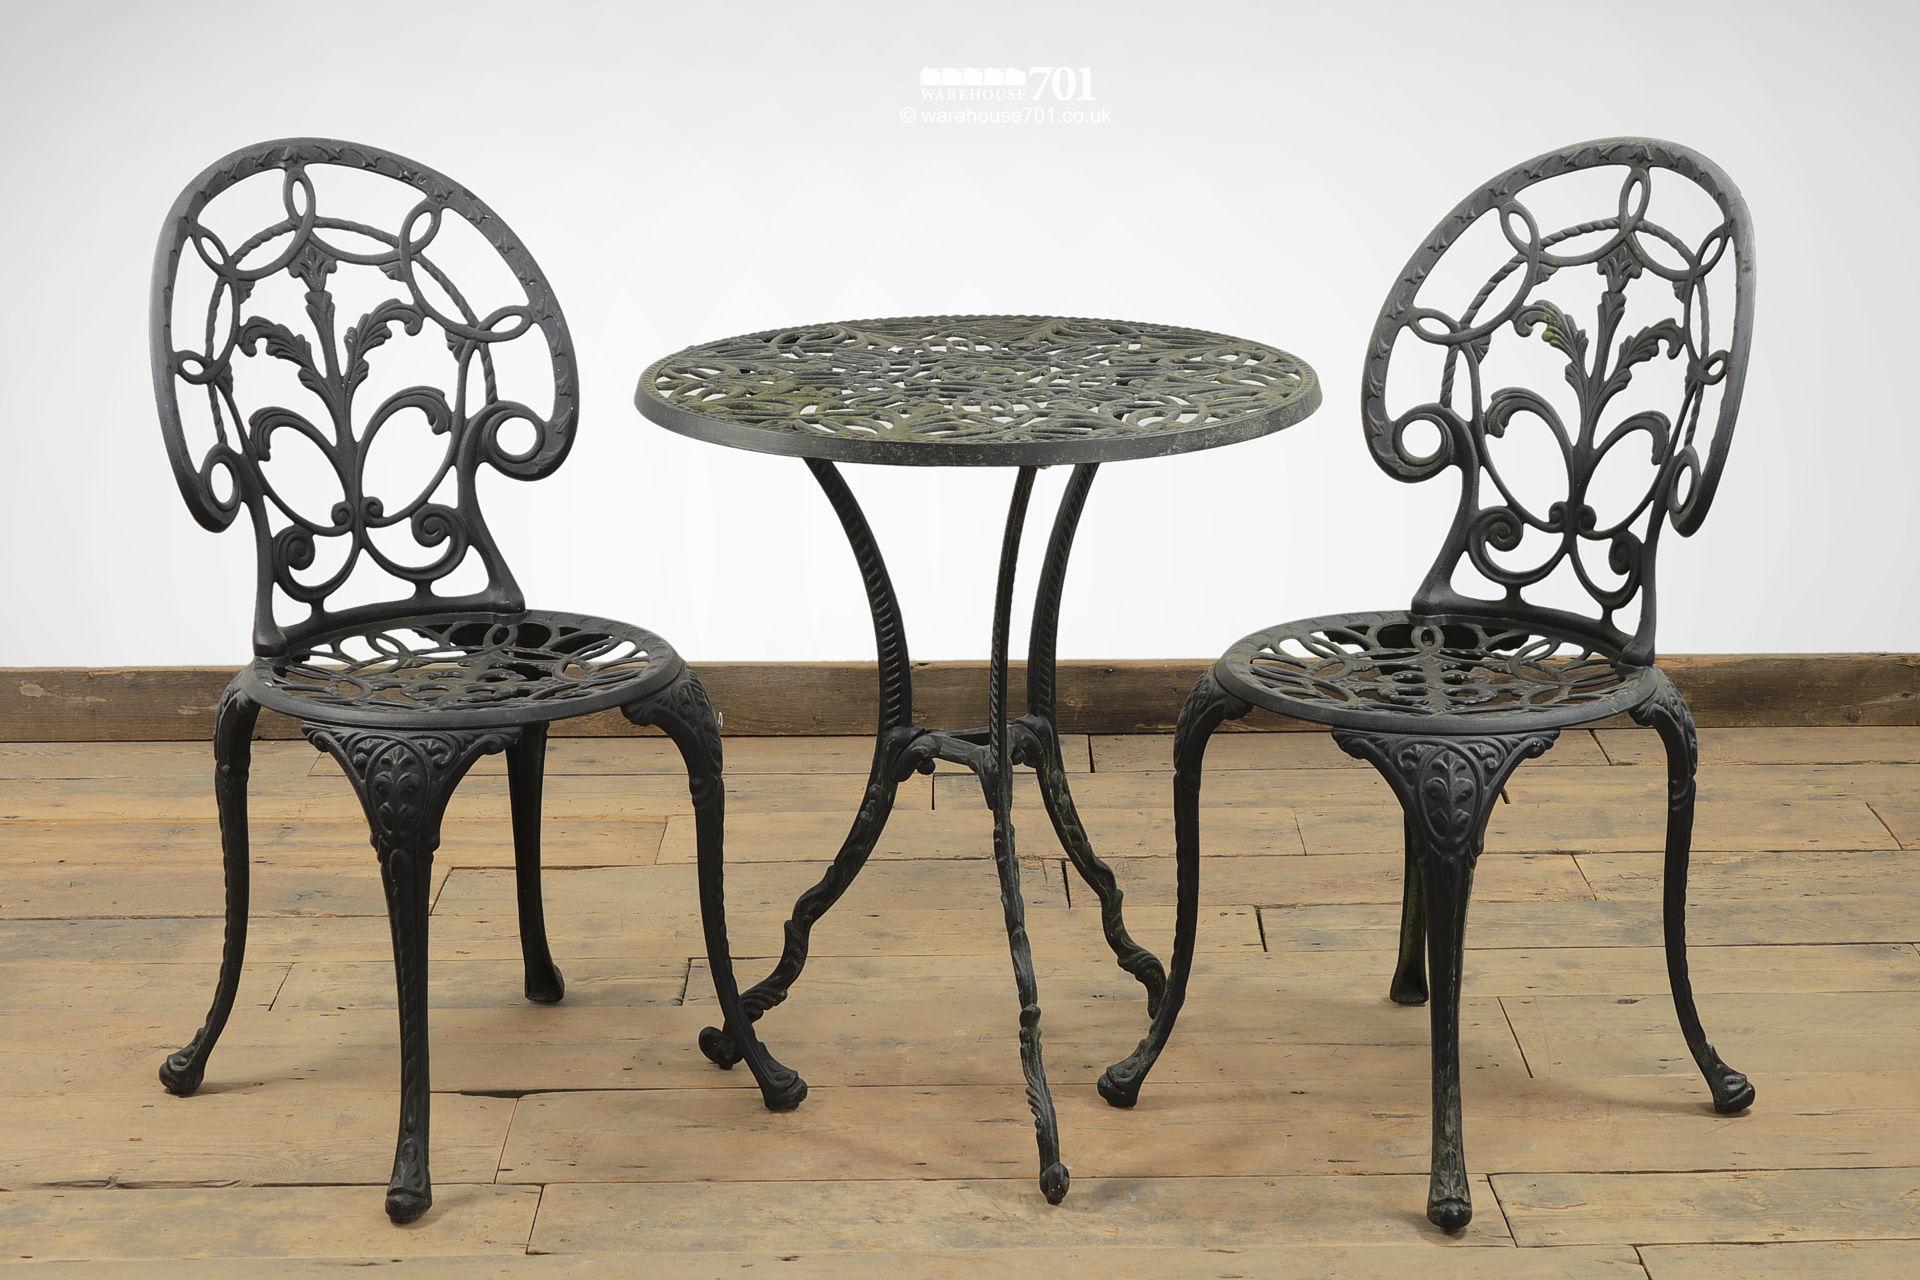 Used Lightweight Alloy Garden Table and Two Chairs in Black #2